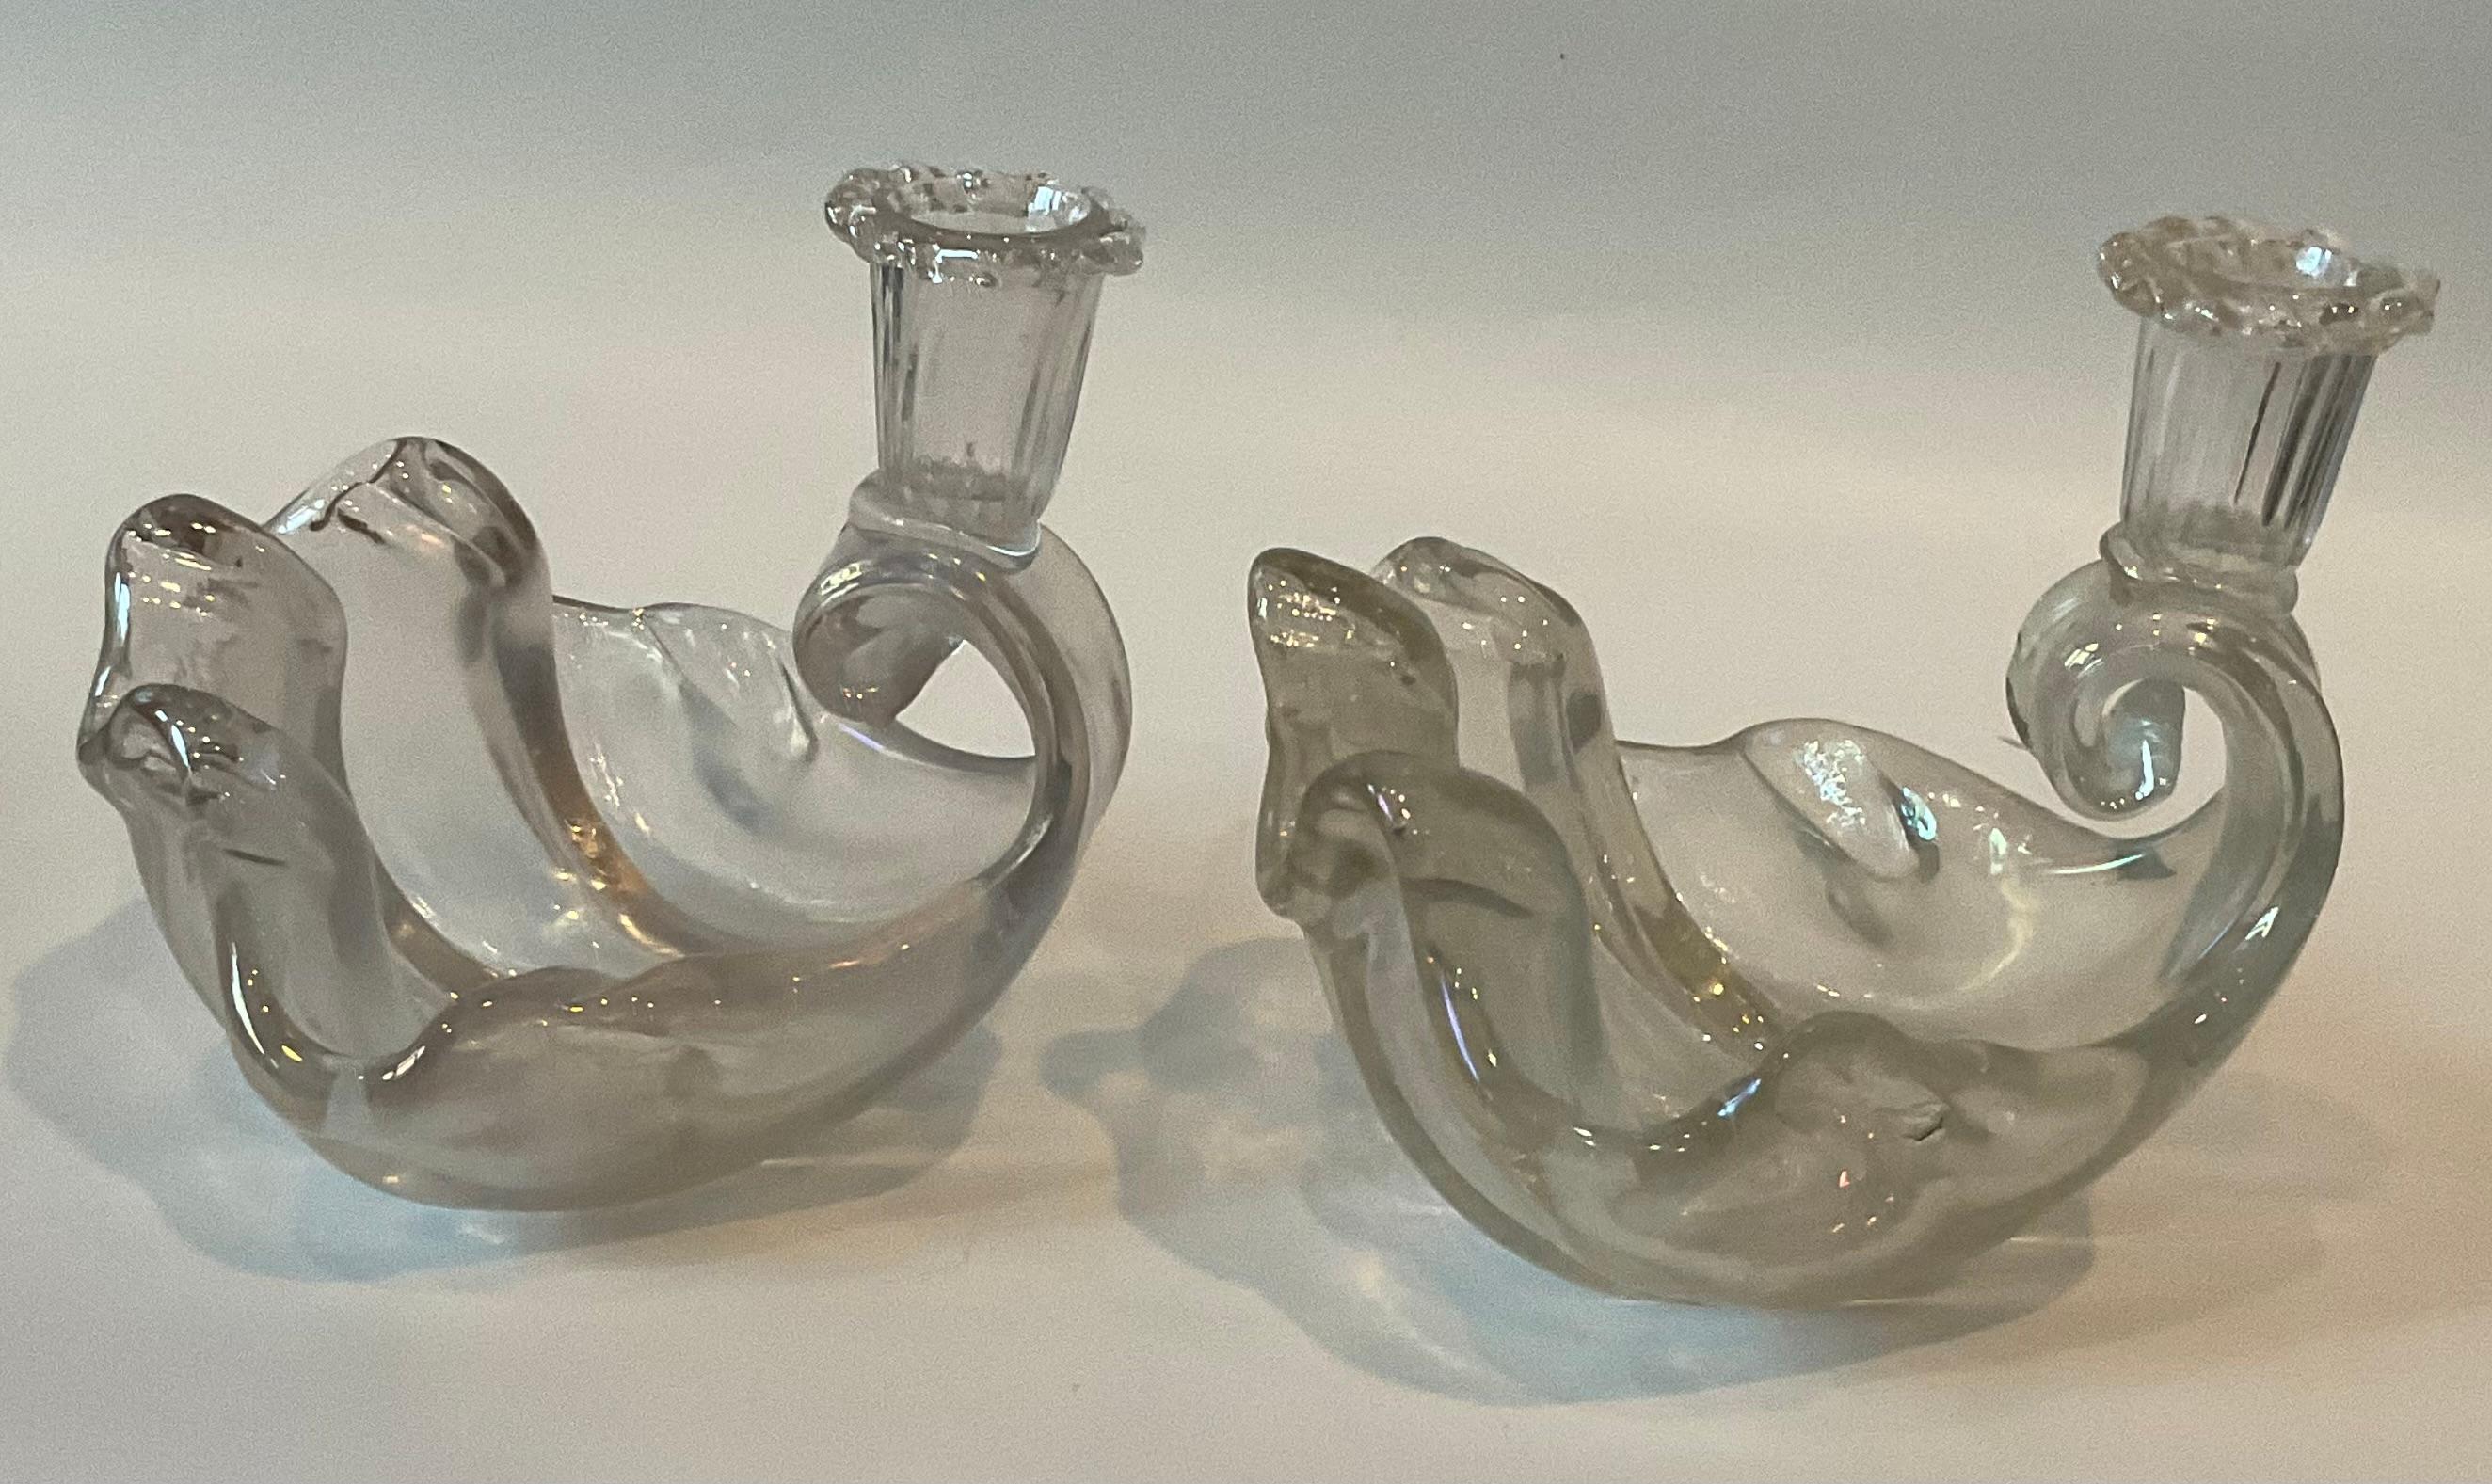 PAIR Ercole Barovier Murano Art Glass Shell Candle Holders Opalescent glass  In Good Condition For Sale In Ann Arbor, MI